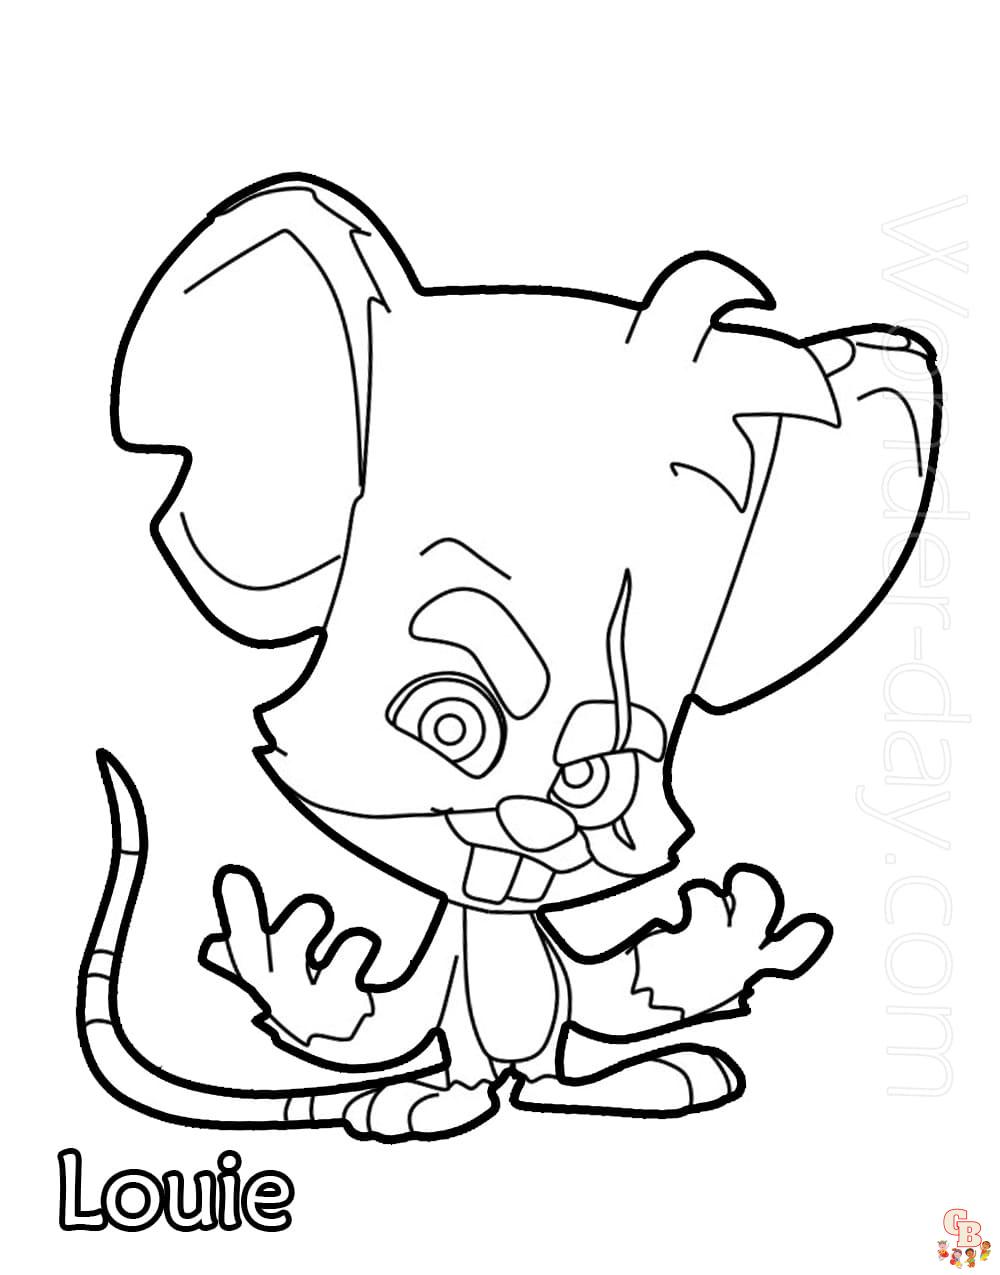 Zooba Coloring Pages 8